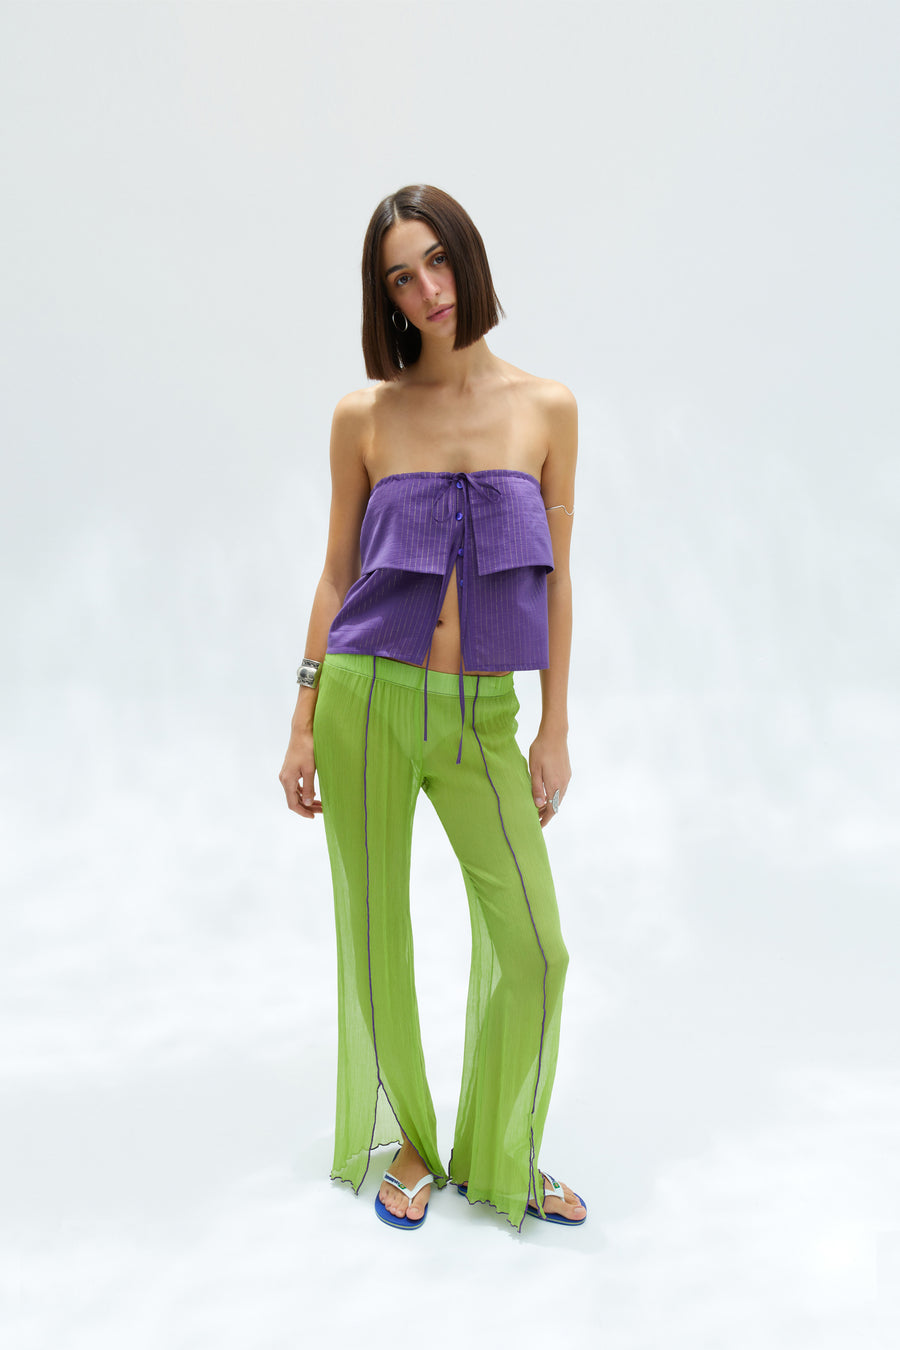 GUDO - Chiffon pants with front slits and contrast stitching